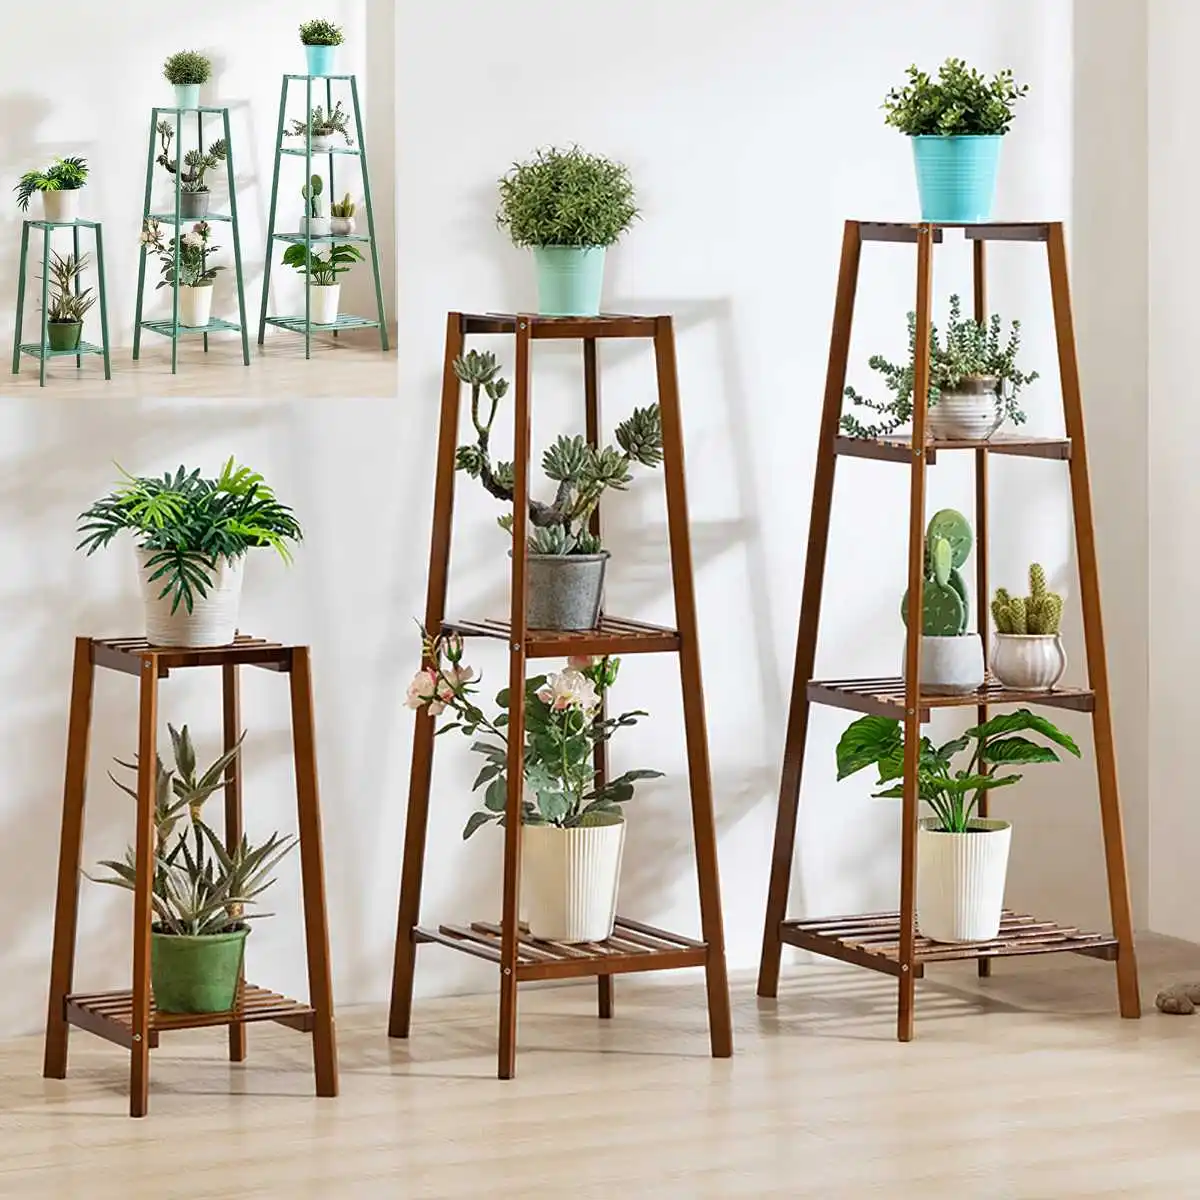 

4 Layers Simplicity Wood Stand For Plants Landing Type Light Extravagant Multi-storey Shelf Indoor Flowerpot Frame Flower Stand